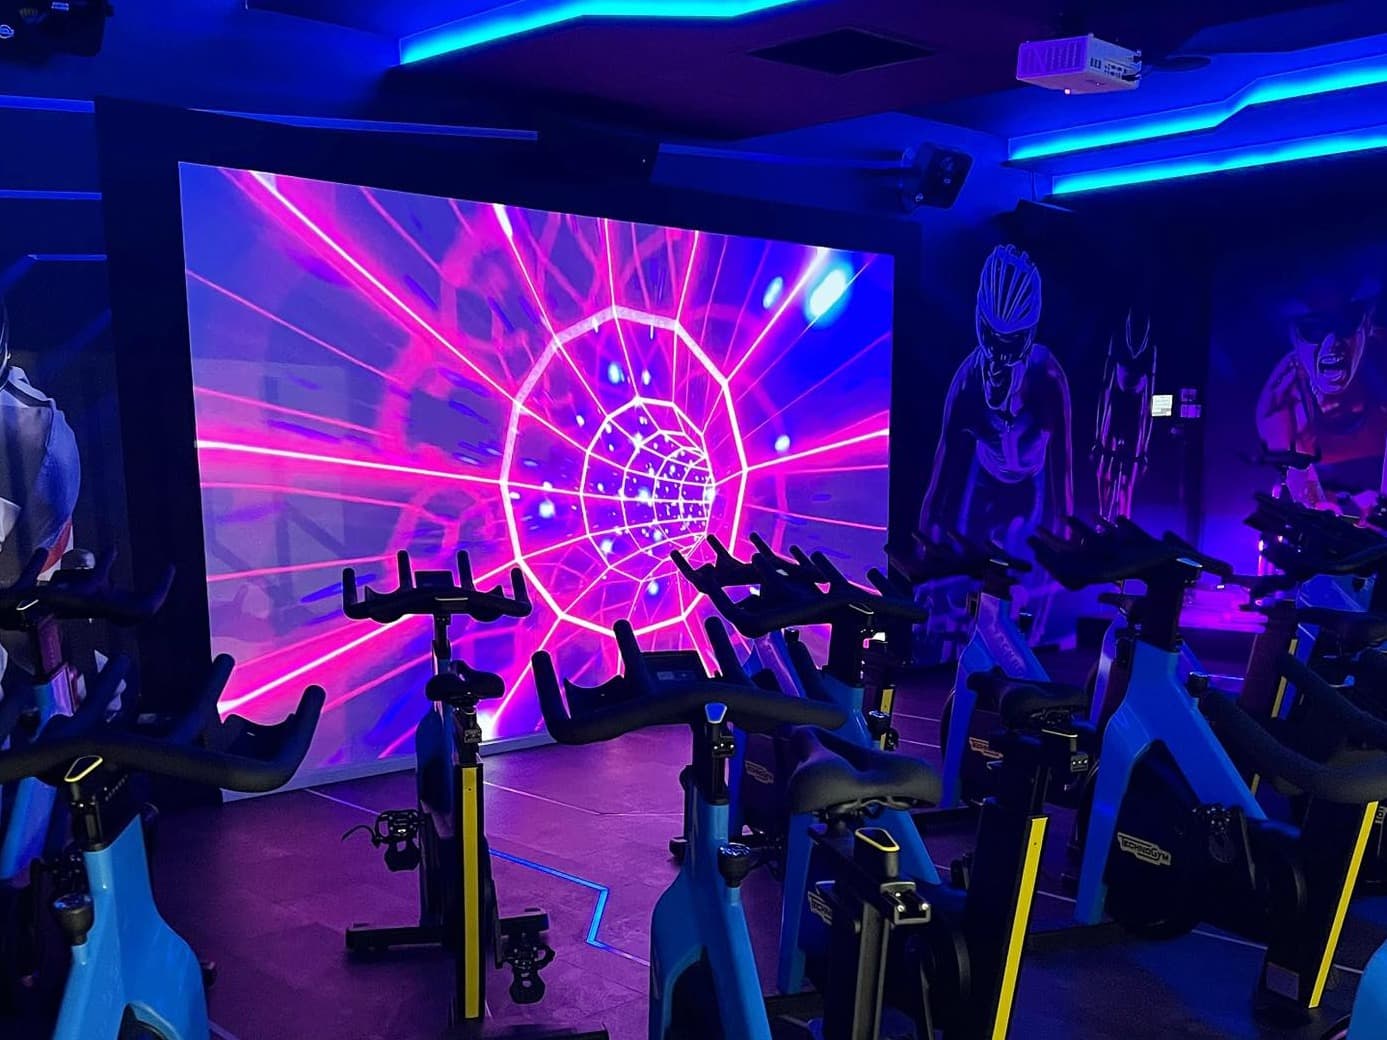 One Fitness Club Issy-Les-Moulineaux